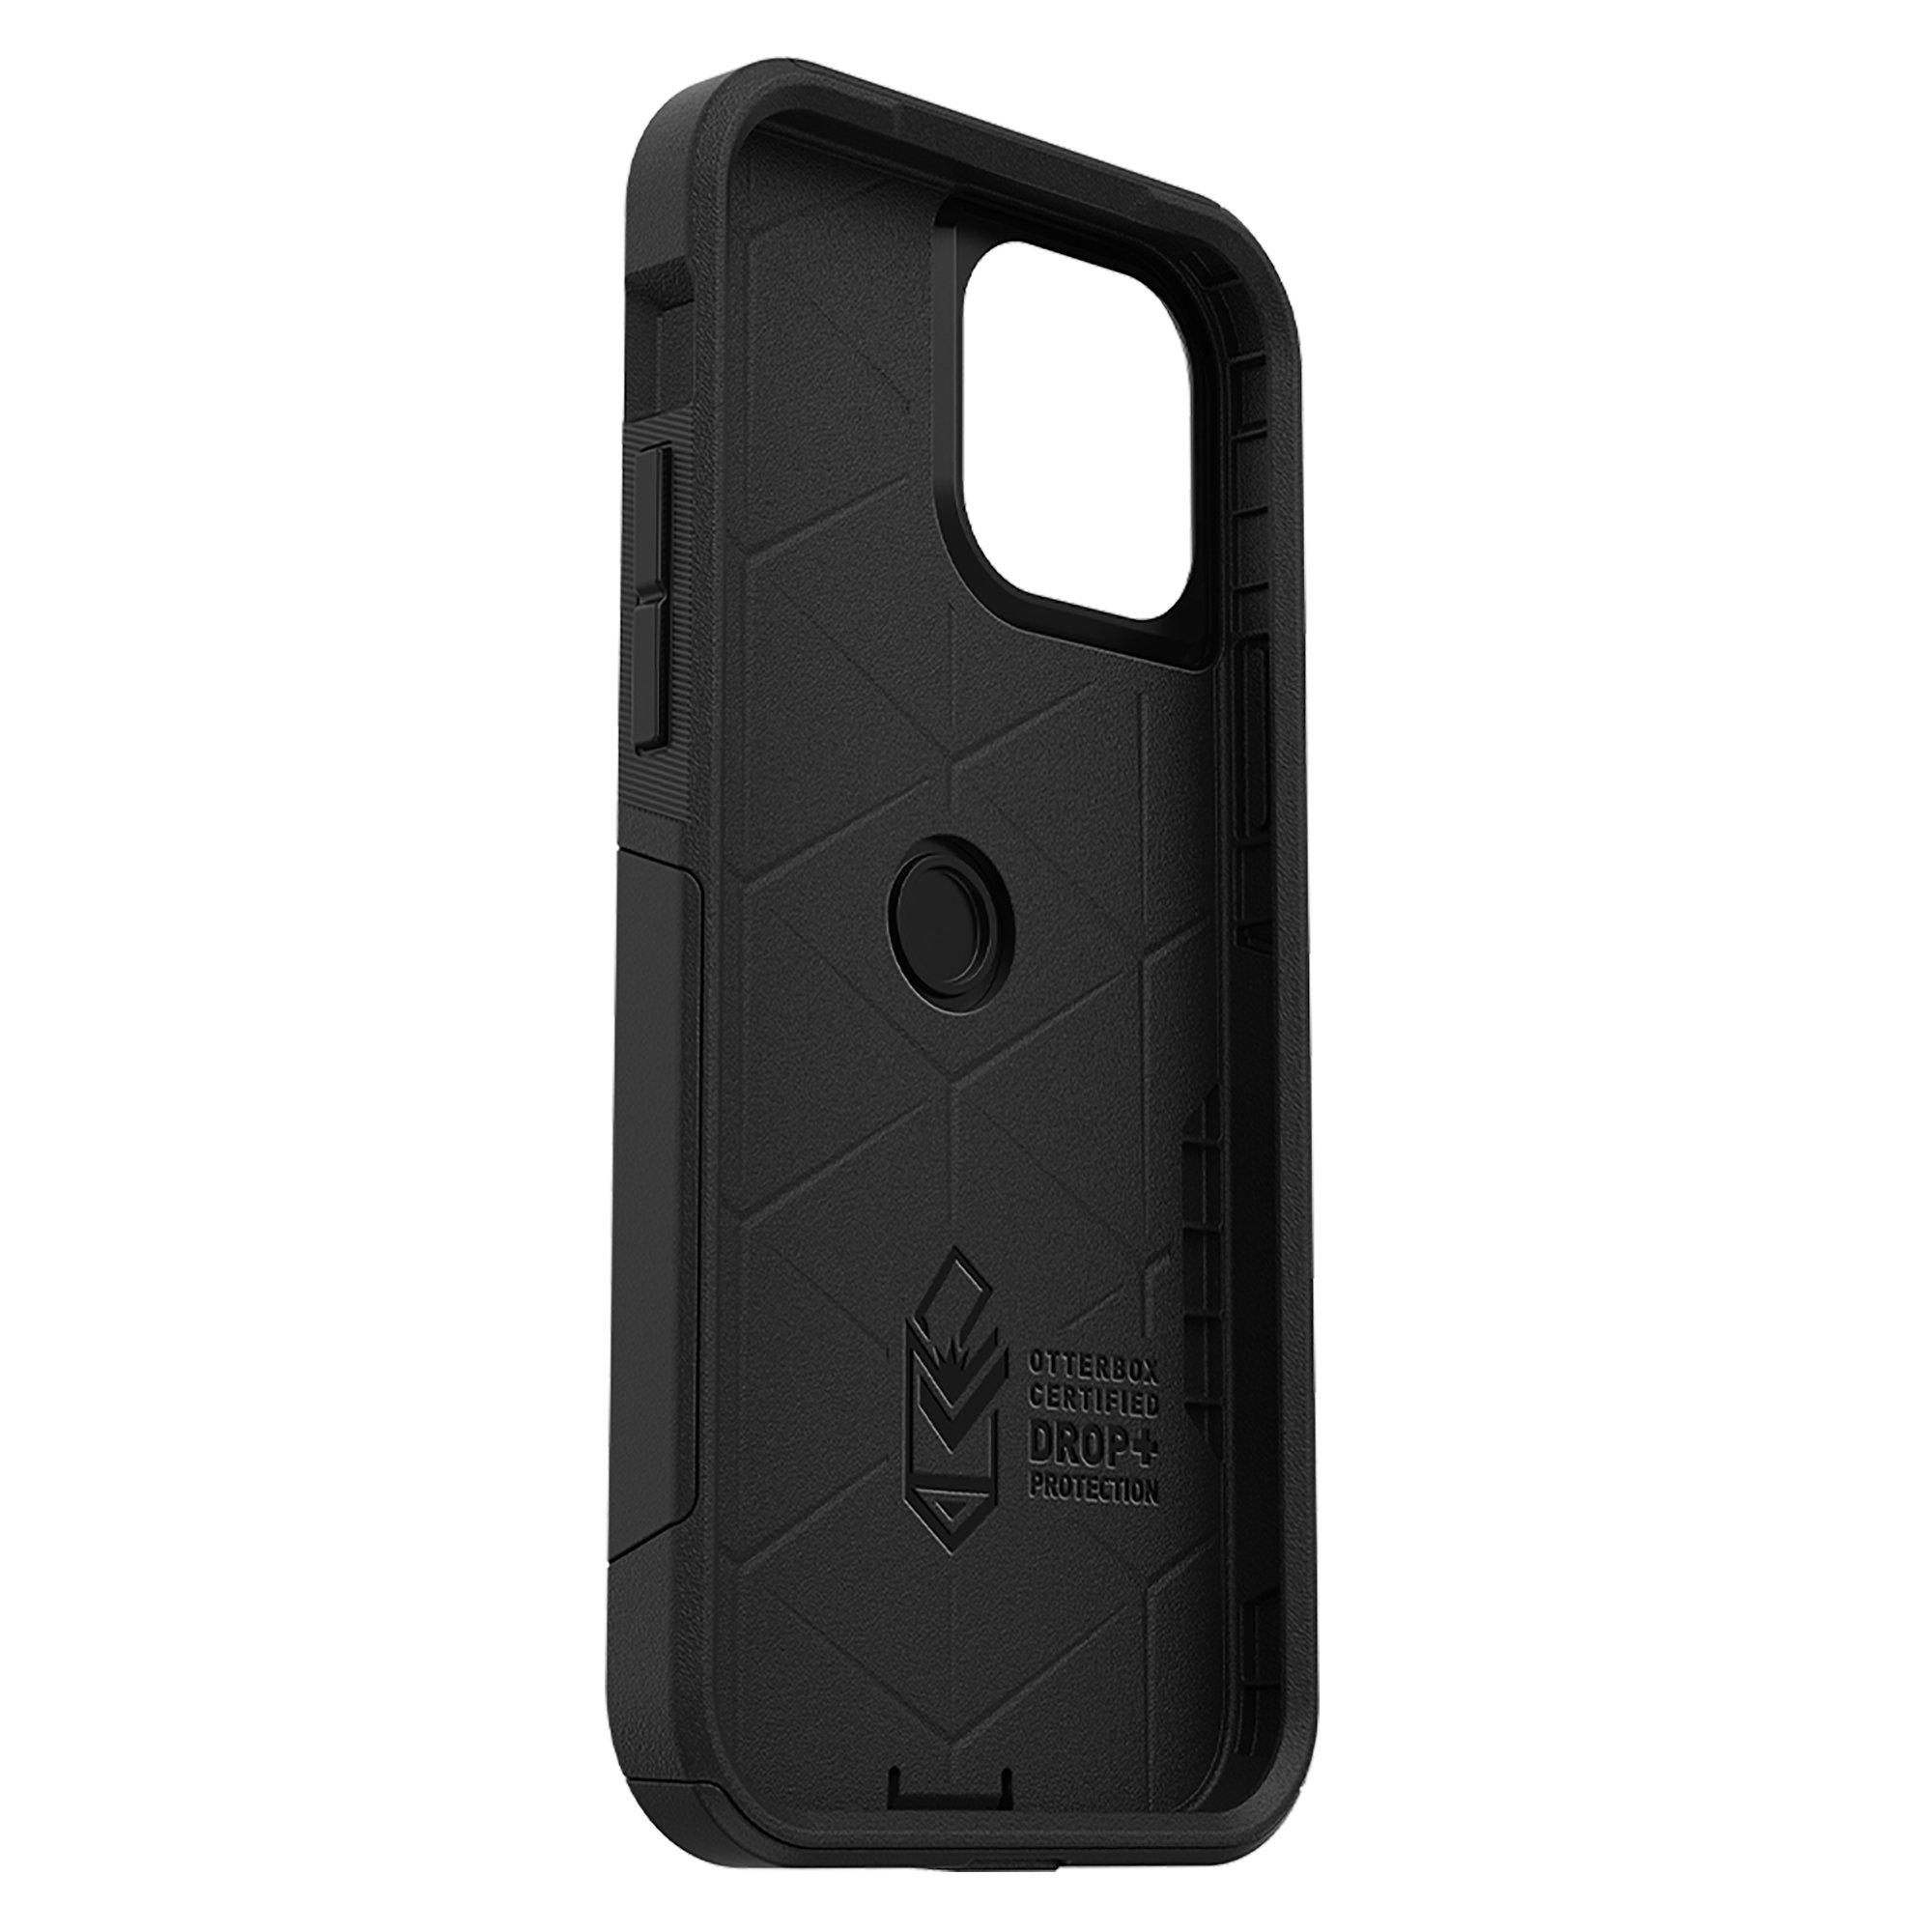 Otterbox Commuter Antimicrobial Case For Iphone 12 12 Pro